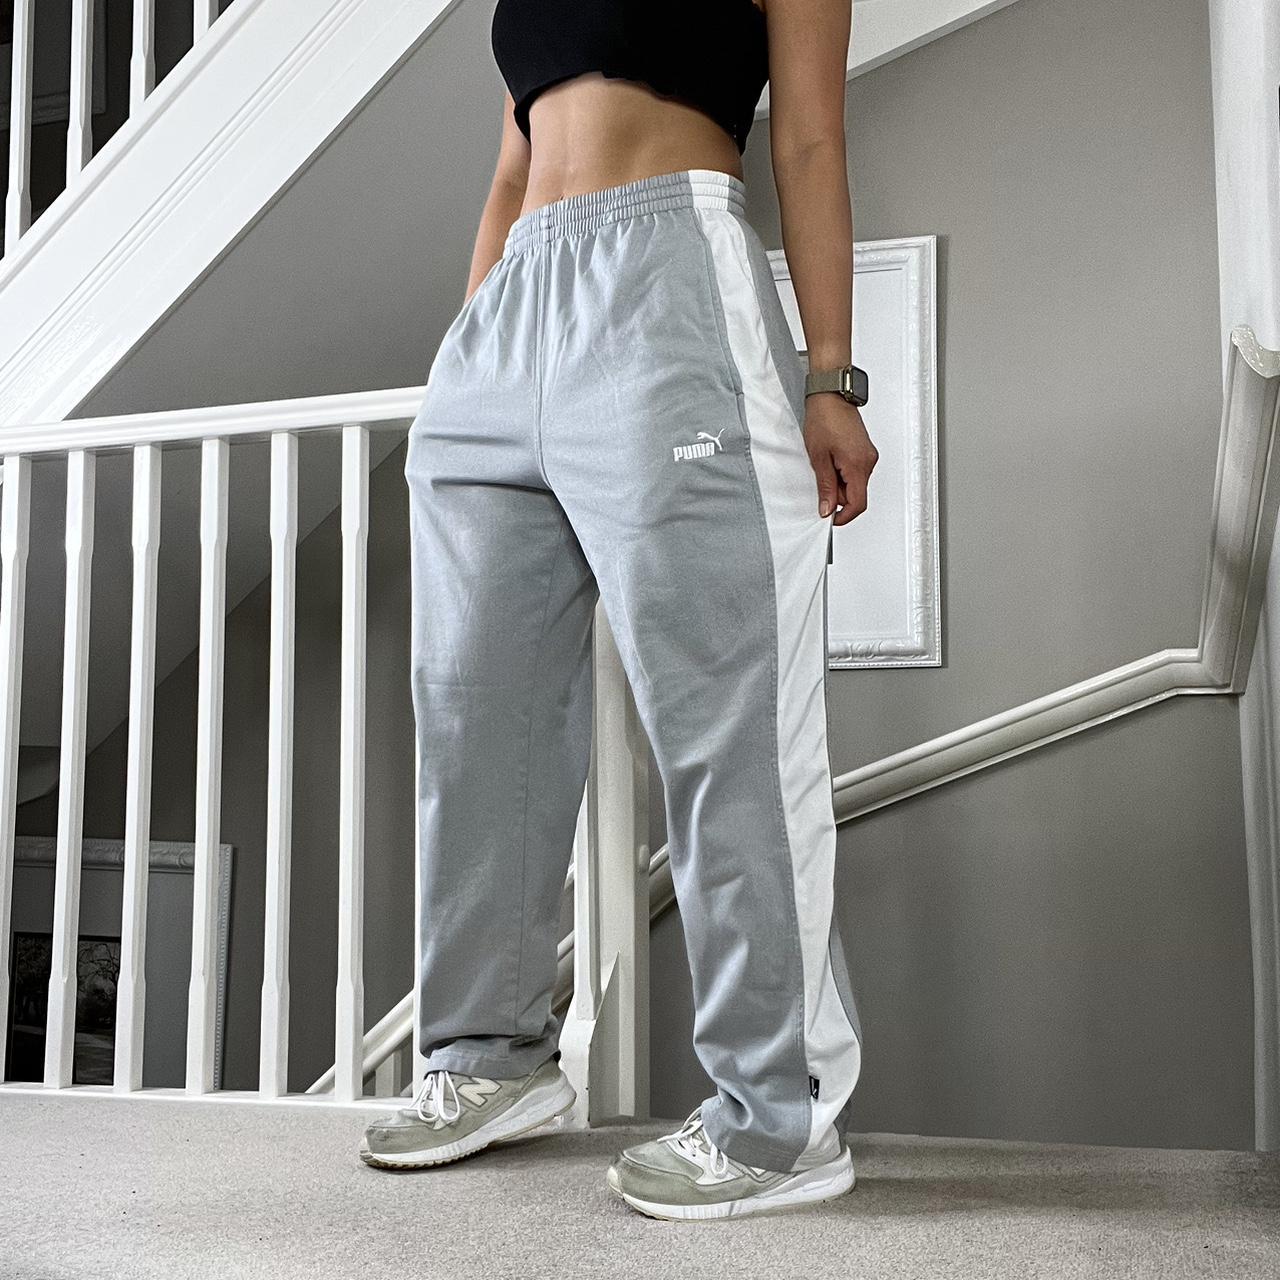 Puma Womens Track Pants in Erode - Dealers, Manufacturers & Suppliers -  Justdial